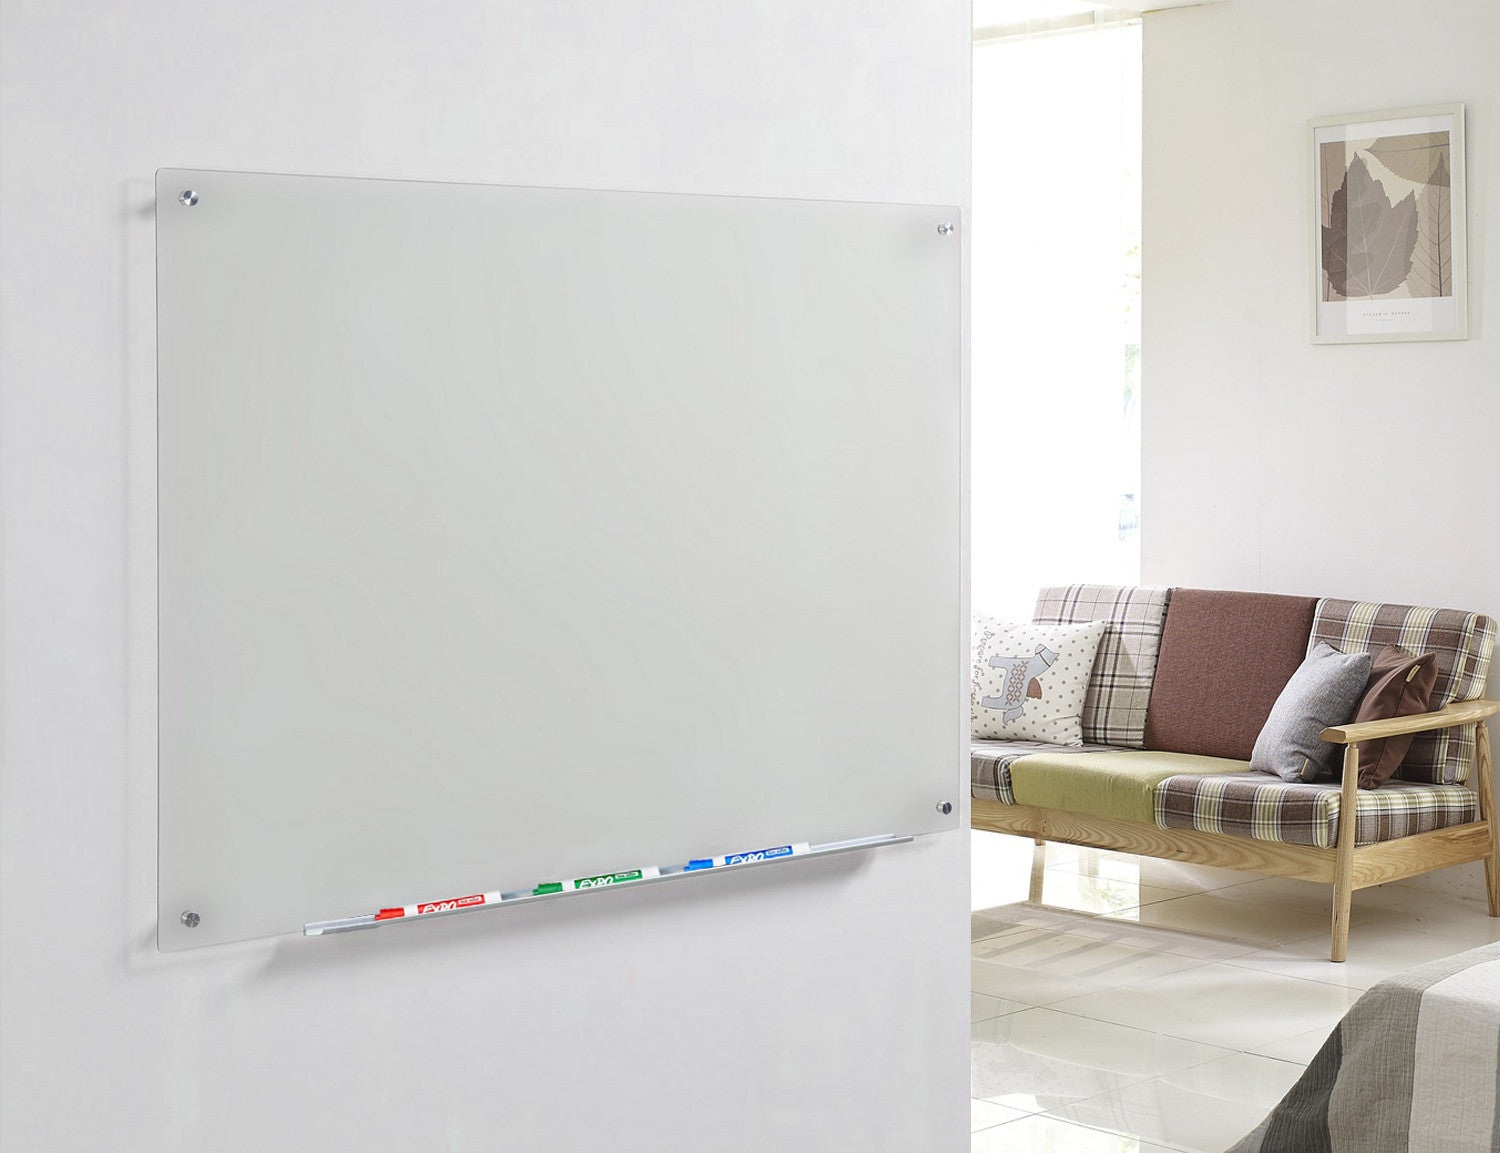 Frosted Glass Dry-Erase Board with Aluminum Marker Tray (Non-Magnetic).